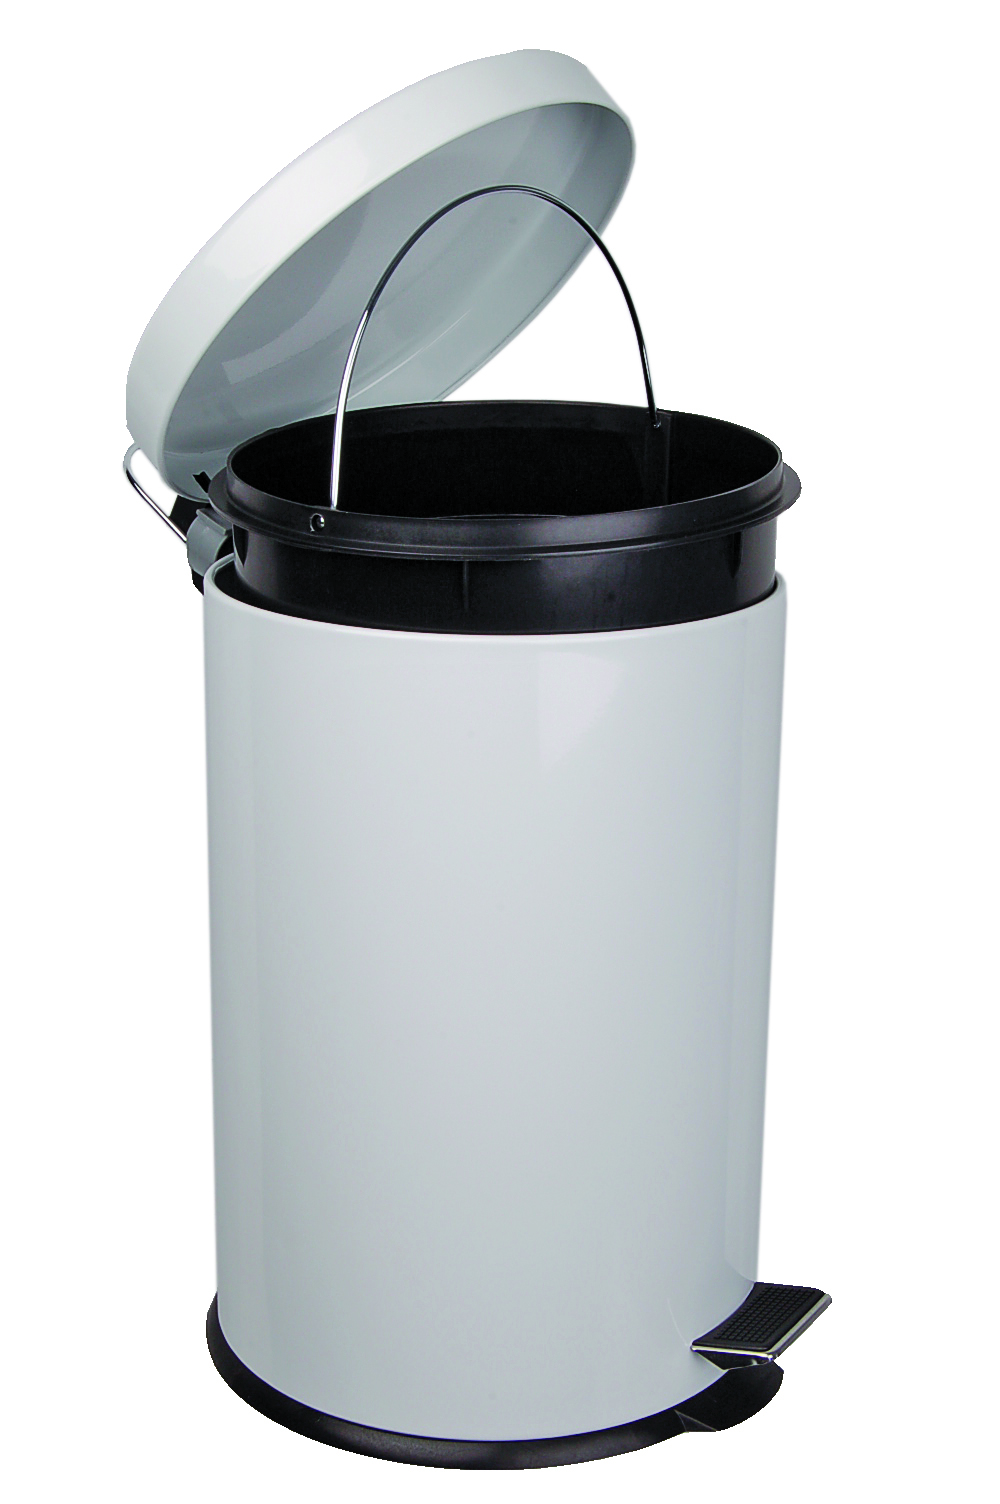 White Steel Pedal Bin 20Ltr with galvanised liner